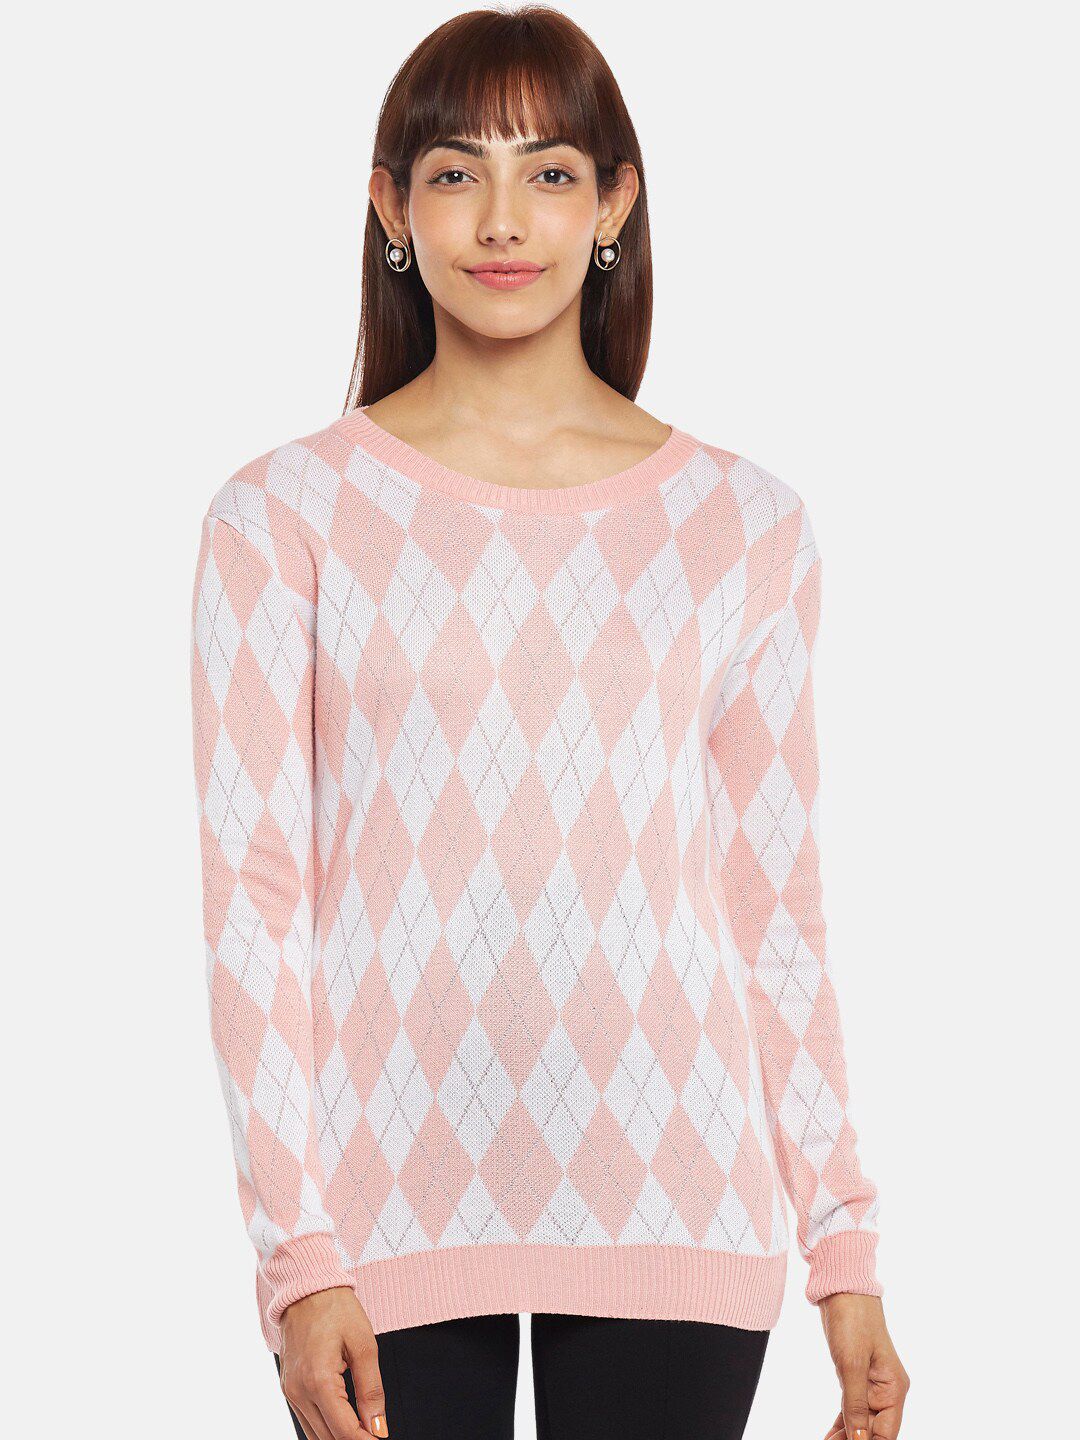 Annabelle by Pantaloons Pink Geometric Print Top Price in India